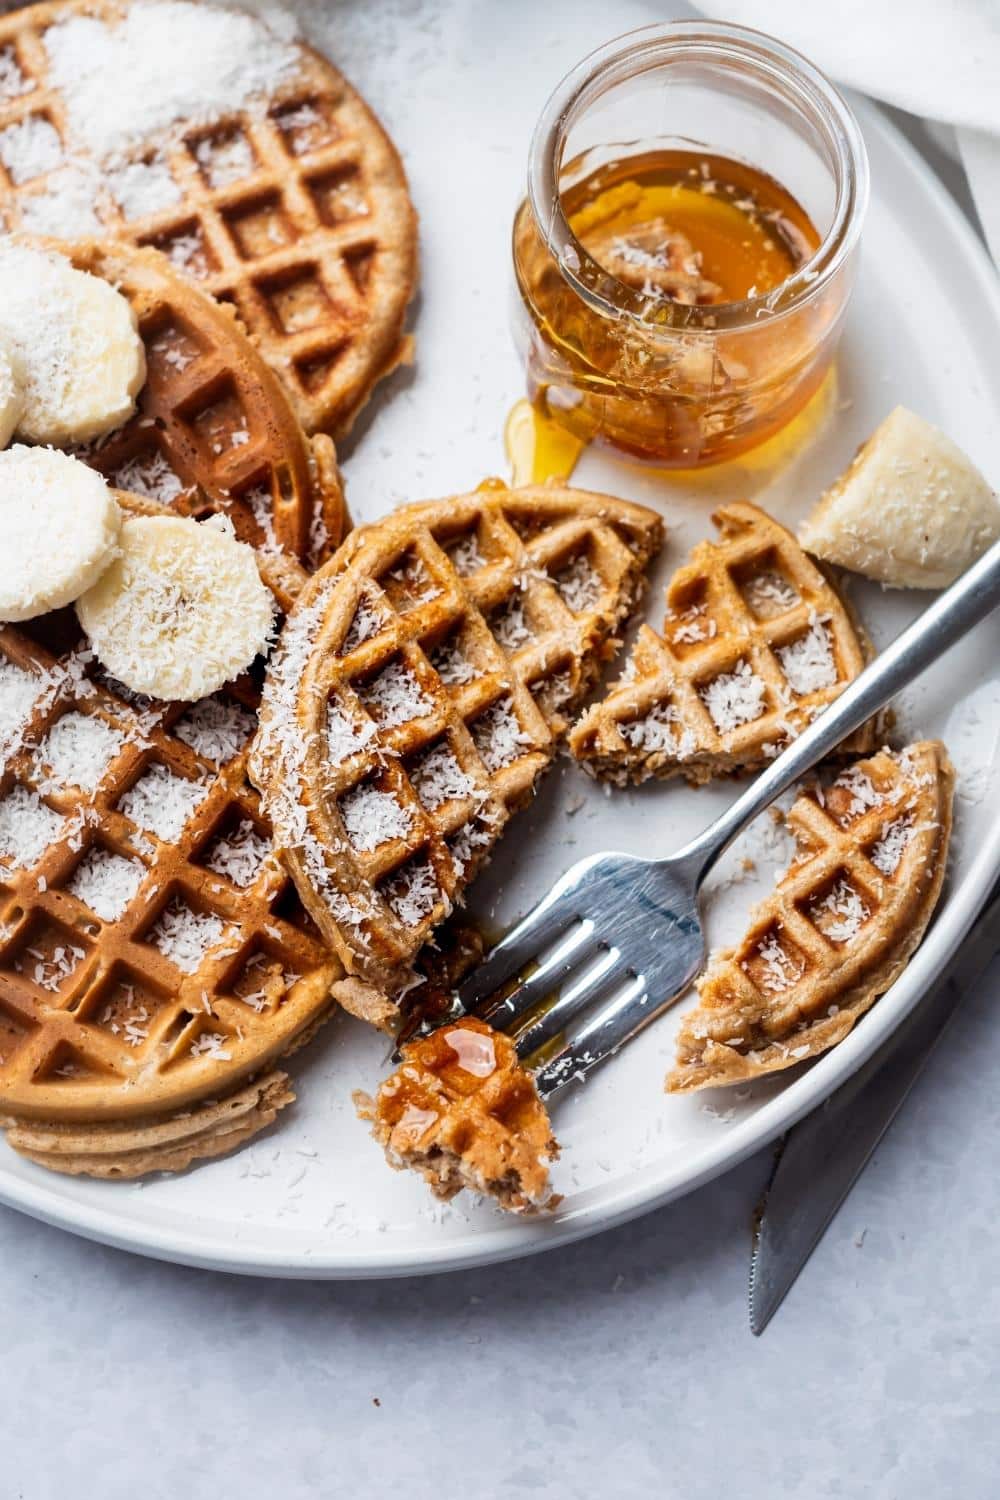 A protein waffle cut into pieces, and parts of three whole protein waffles on a white plate with a jar of syrup on it.